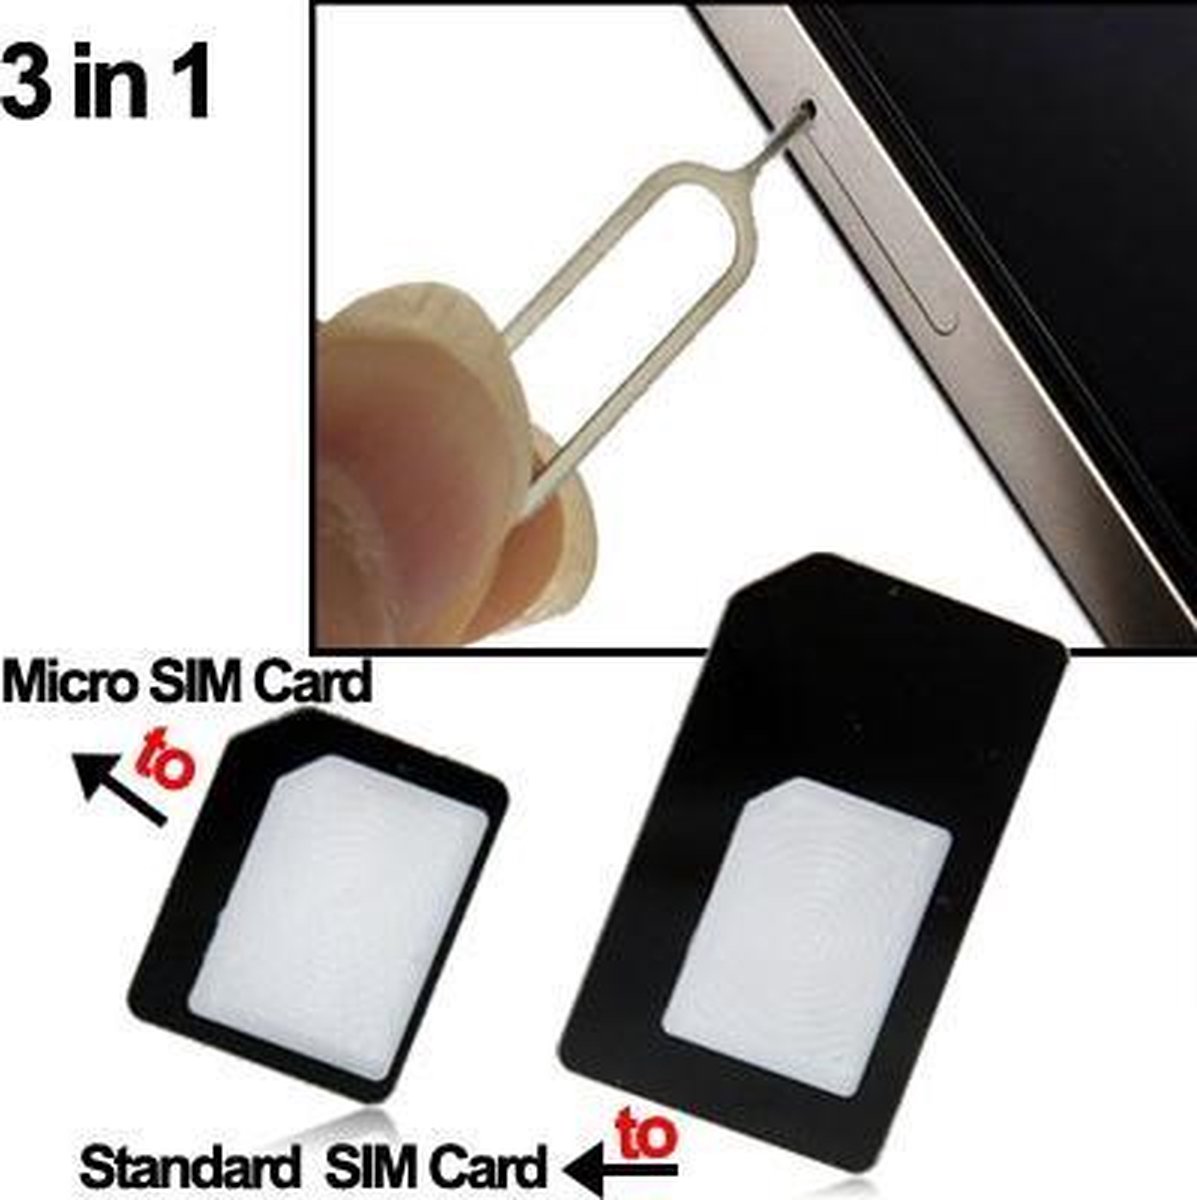 Simcard / simkaart adapters + Eject pin key tool 3 in 1 - myicover